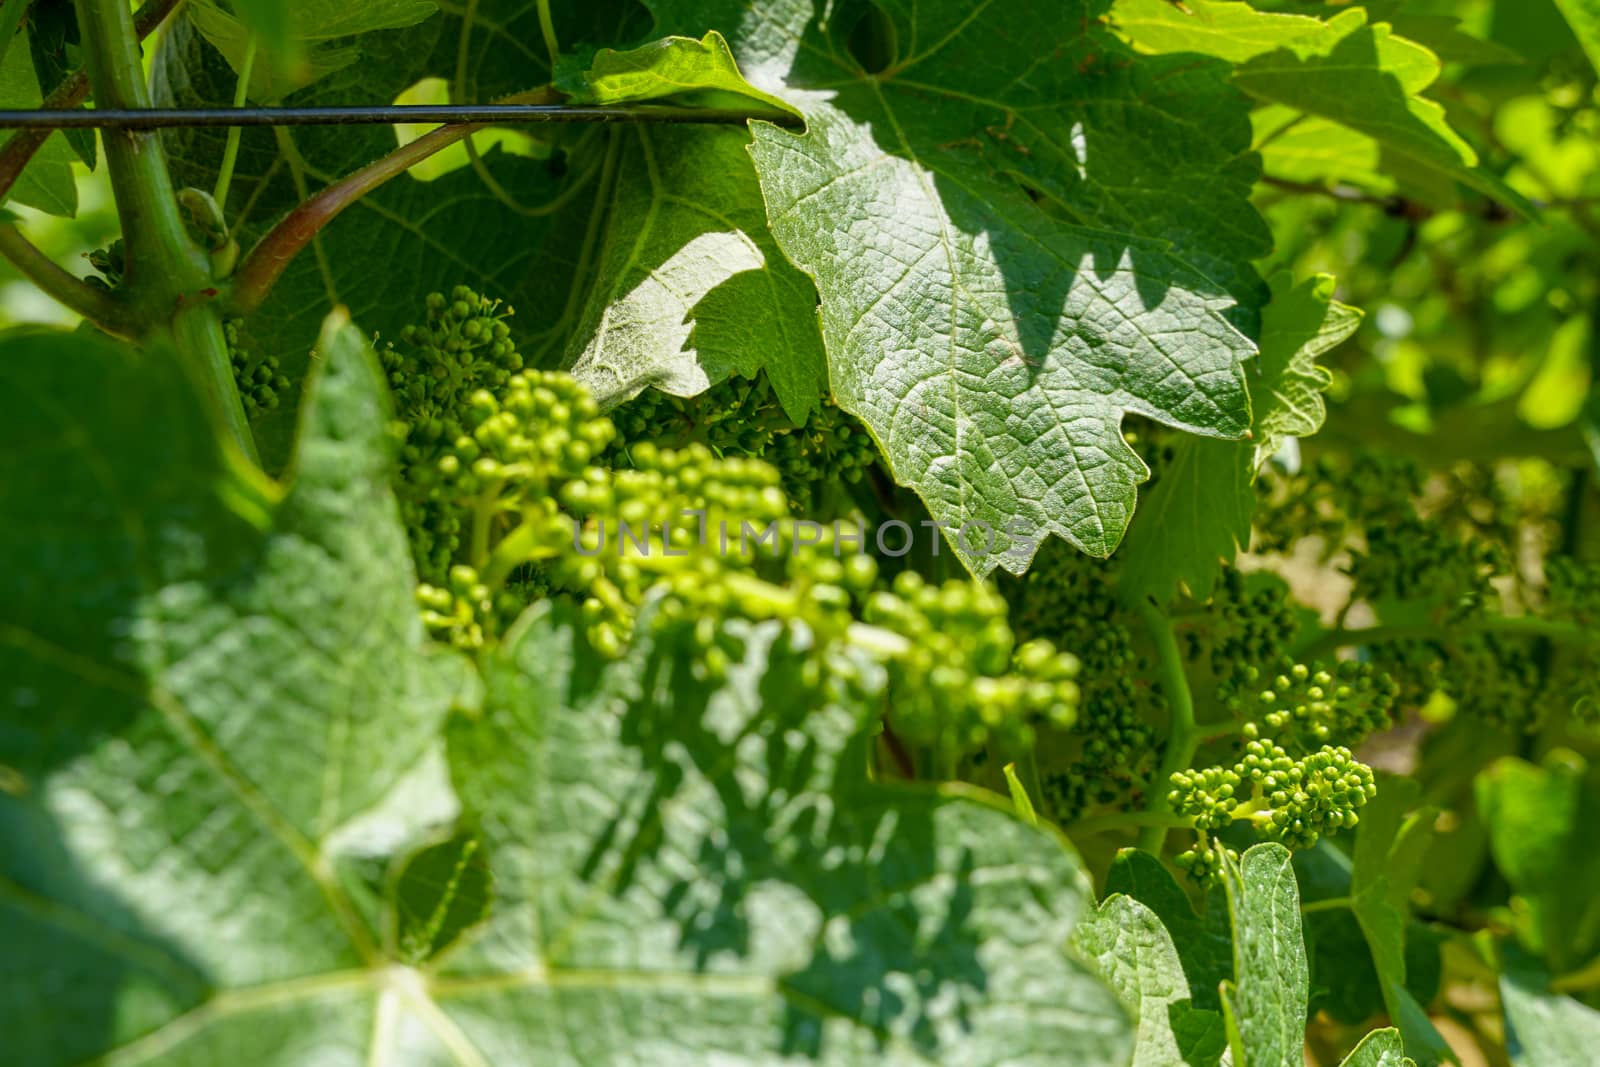 Close up of green wine grape plants in vineyard in Napa Valley. Napa County, in California's Wine Country.